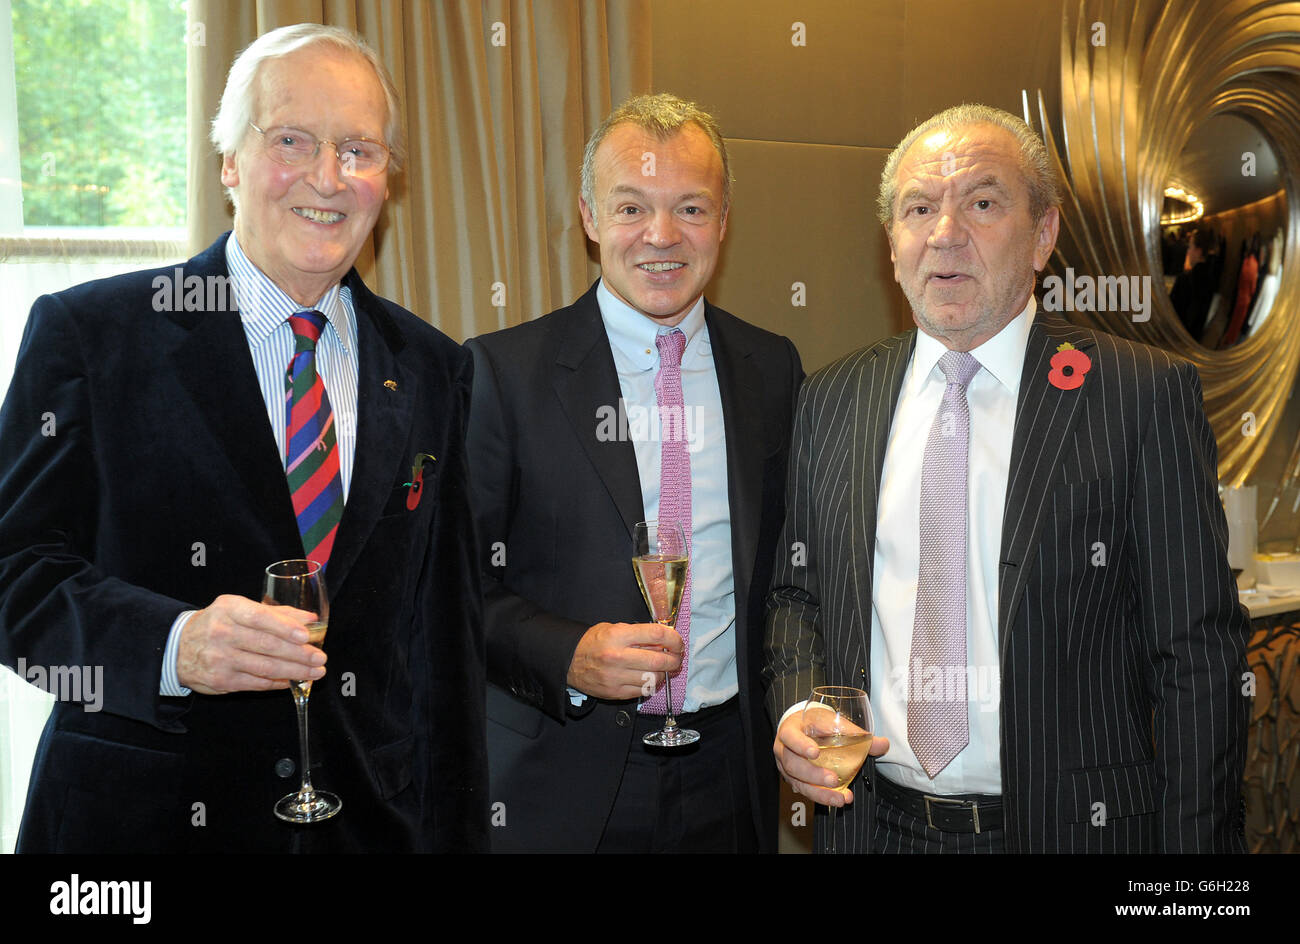 Guest of honour Graham Norton meets Nicholas Parsons (left) and Lord Alan Sugar as he attends a tribute lunch hosted by The Lady Taverners at the Dorchester Hotel, London. Stock Photo